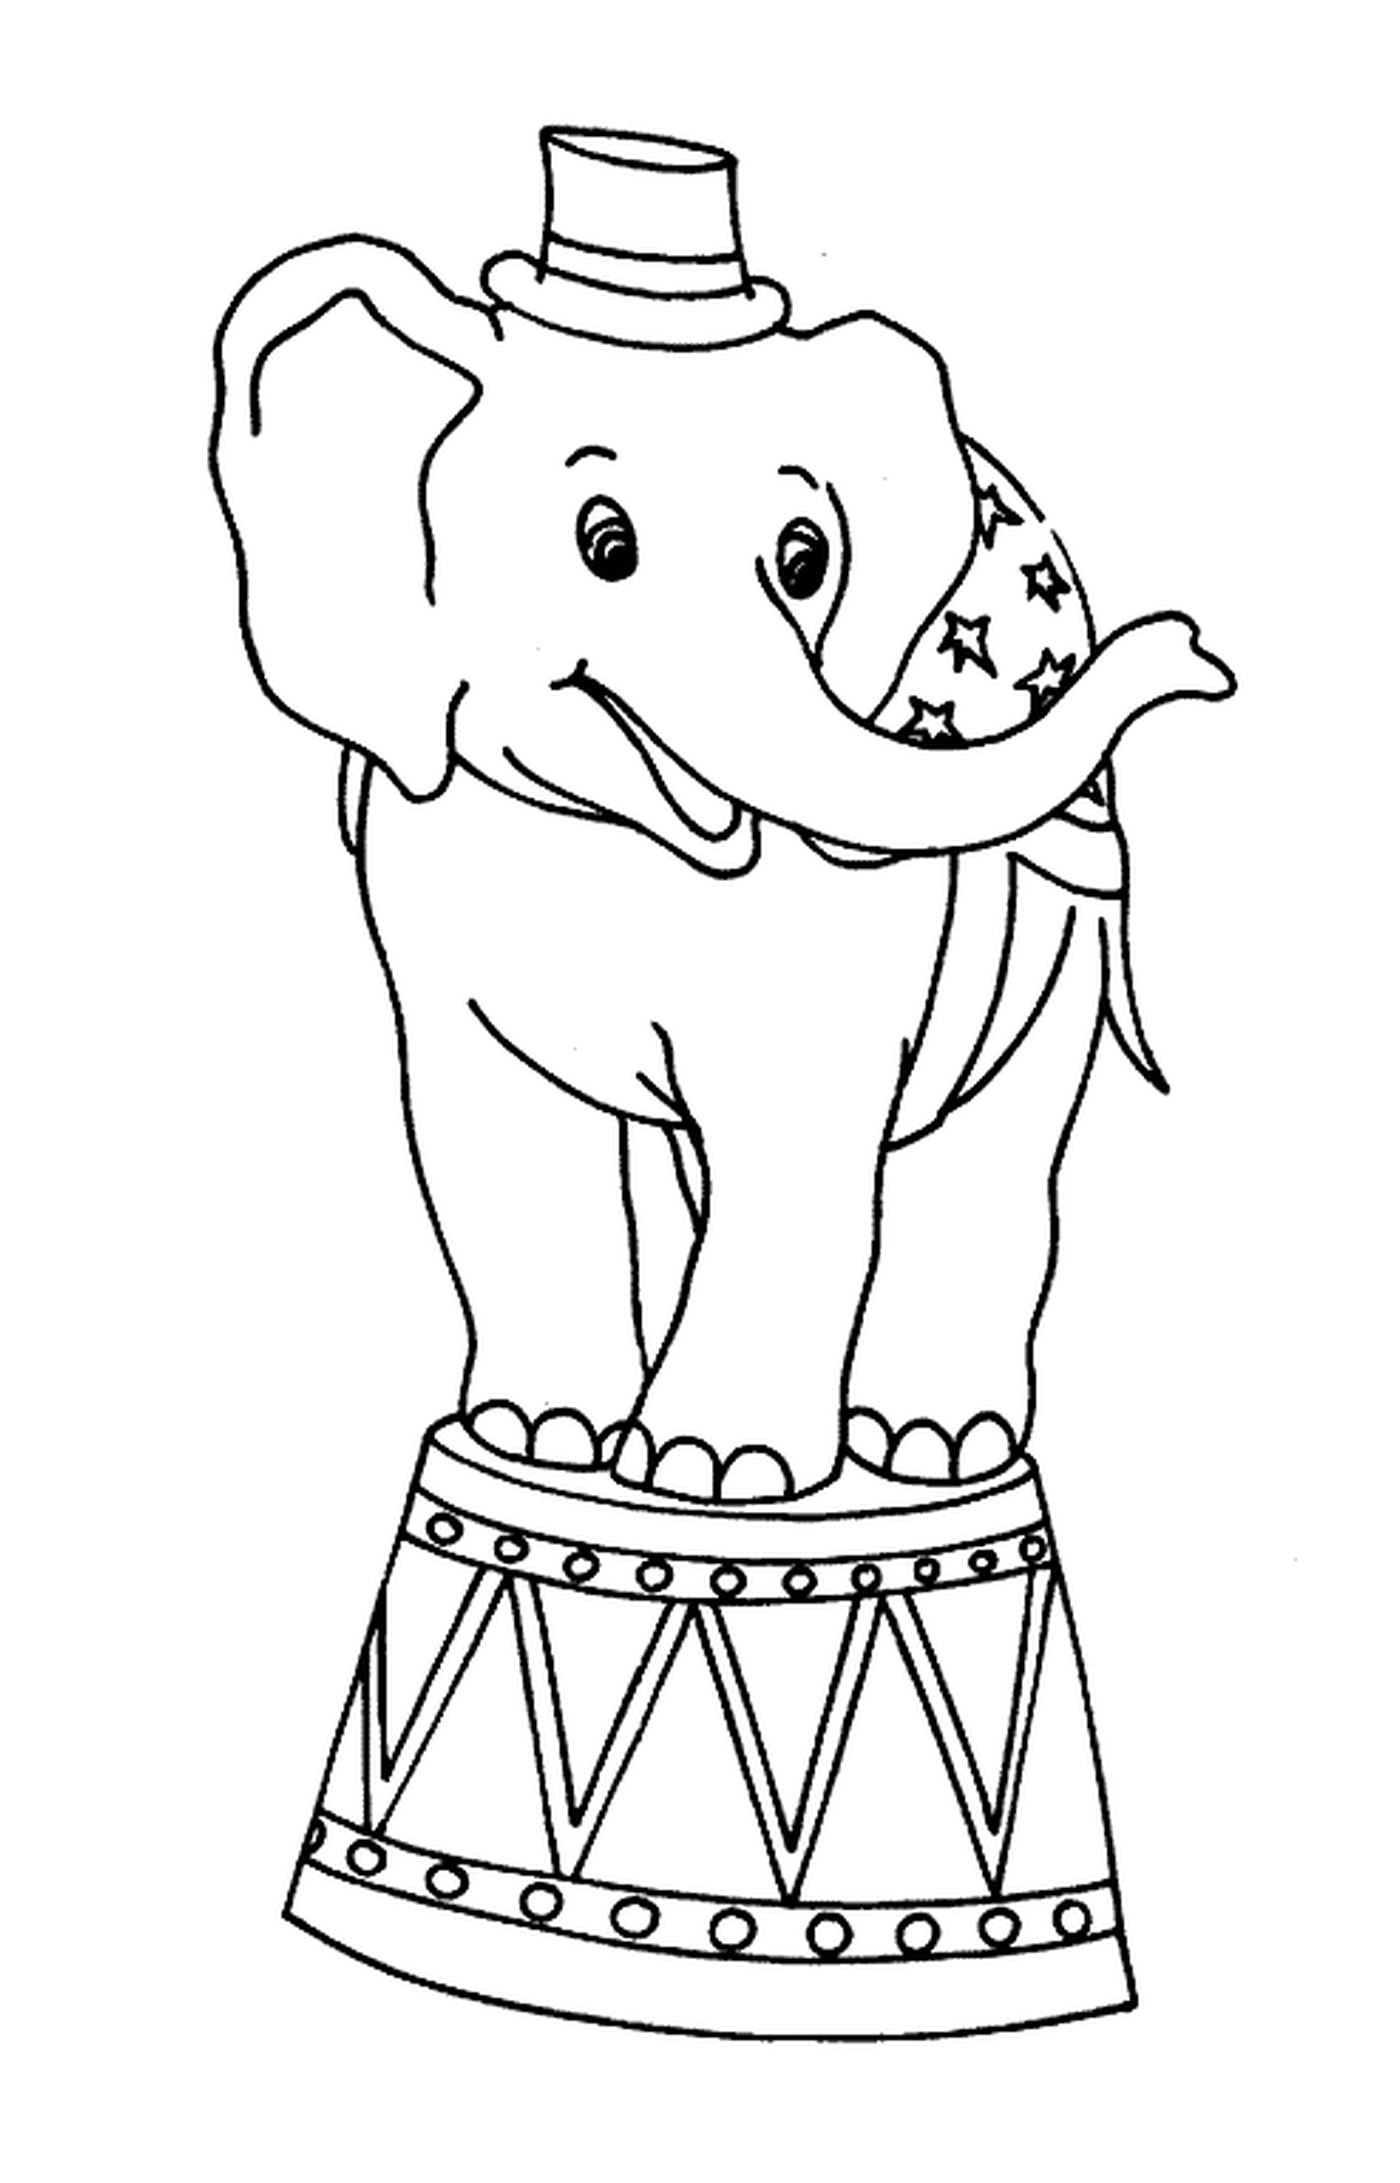  A circus elephant standing on a drum 